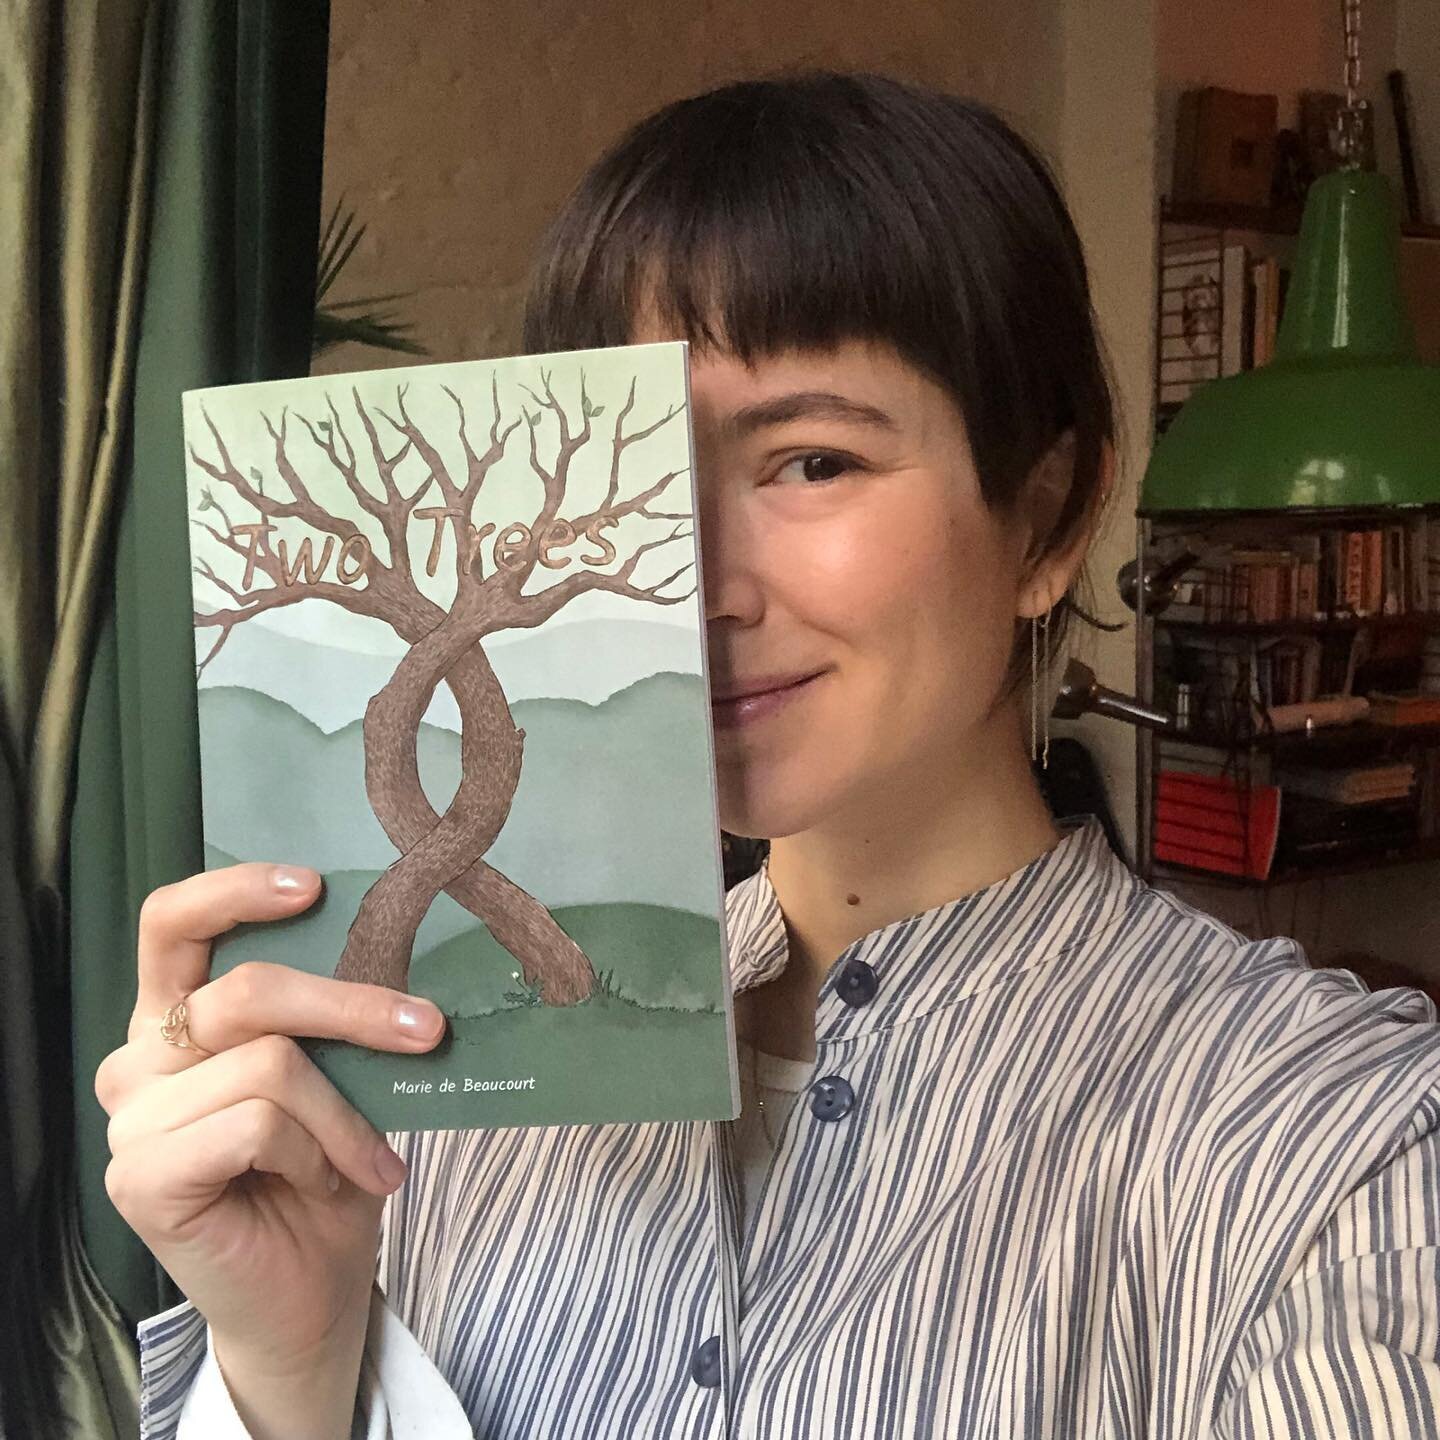 1/3 🗯I made a comic! It&rsquo;s called &ldquo;Two Trees&rdquo; and it&rsquo;s perfectly imperfect and took me way too long to finish but it&rsquo;s done now and you can buy it in a real comic book shop in Berlin and that feels pretty good! 

Sometim